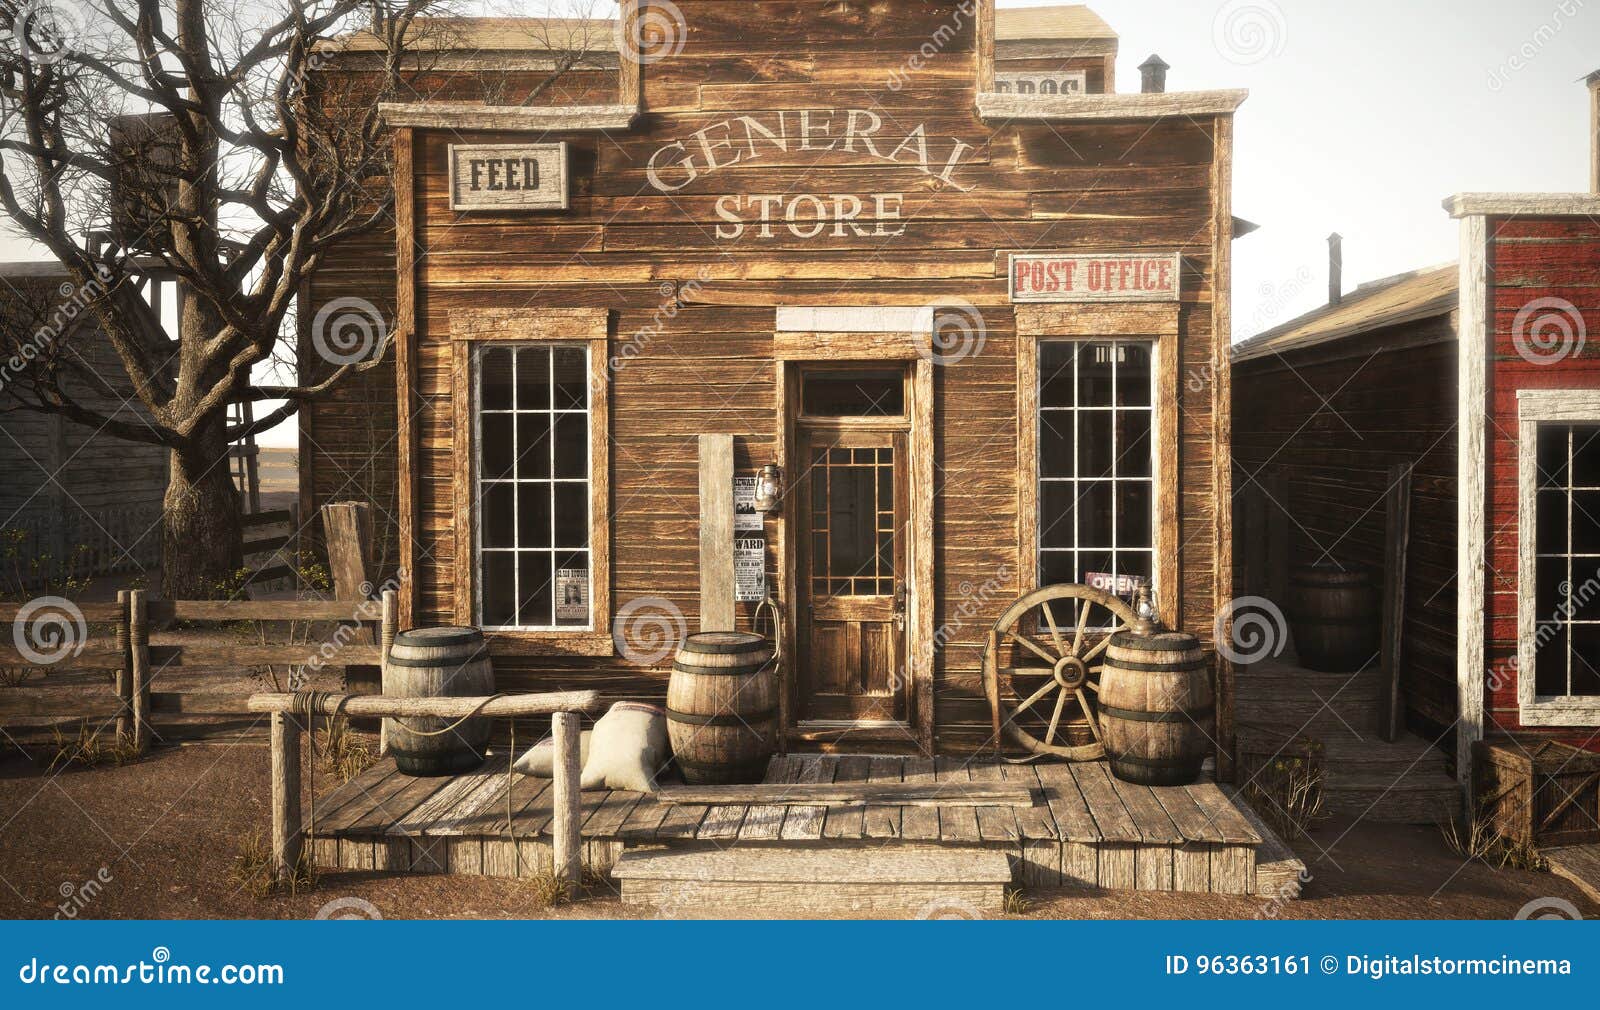 General Store Stock Illustrations – 1,119 General Store Stock